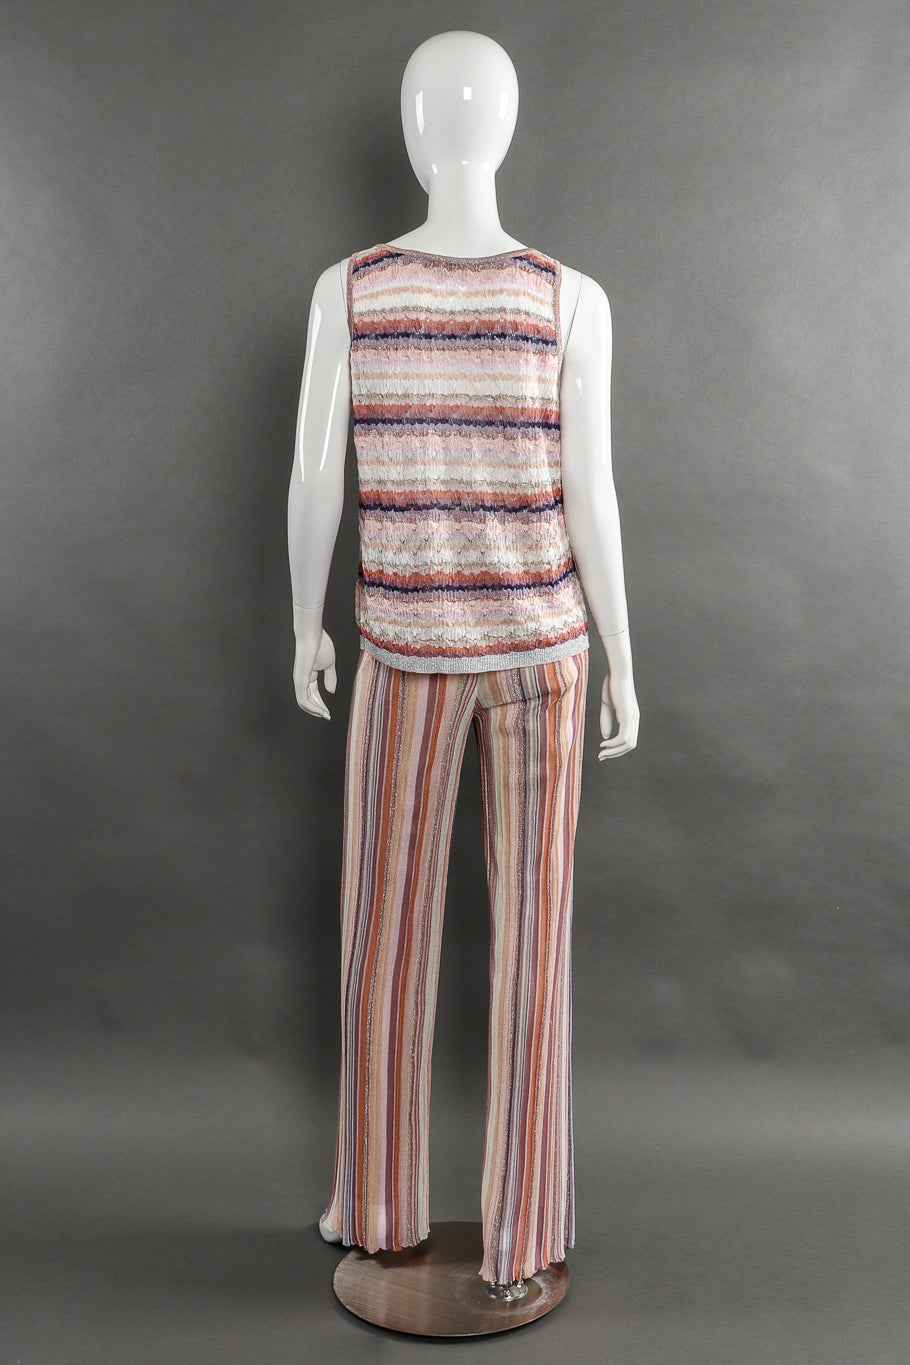 Missoni Striped Knit Duster, Tank, and Pants Set back view of tank and pant on mannequin @Recessla